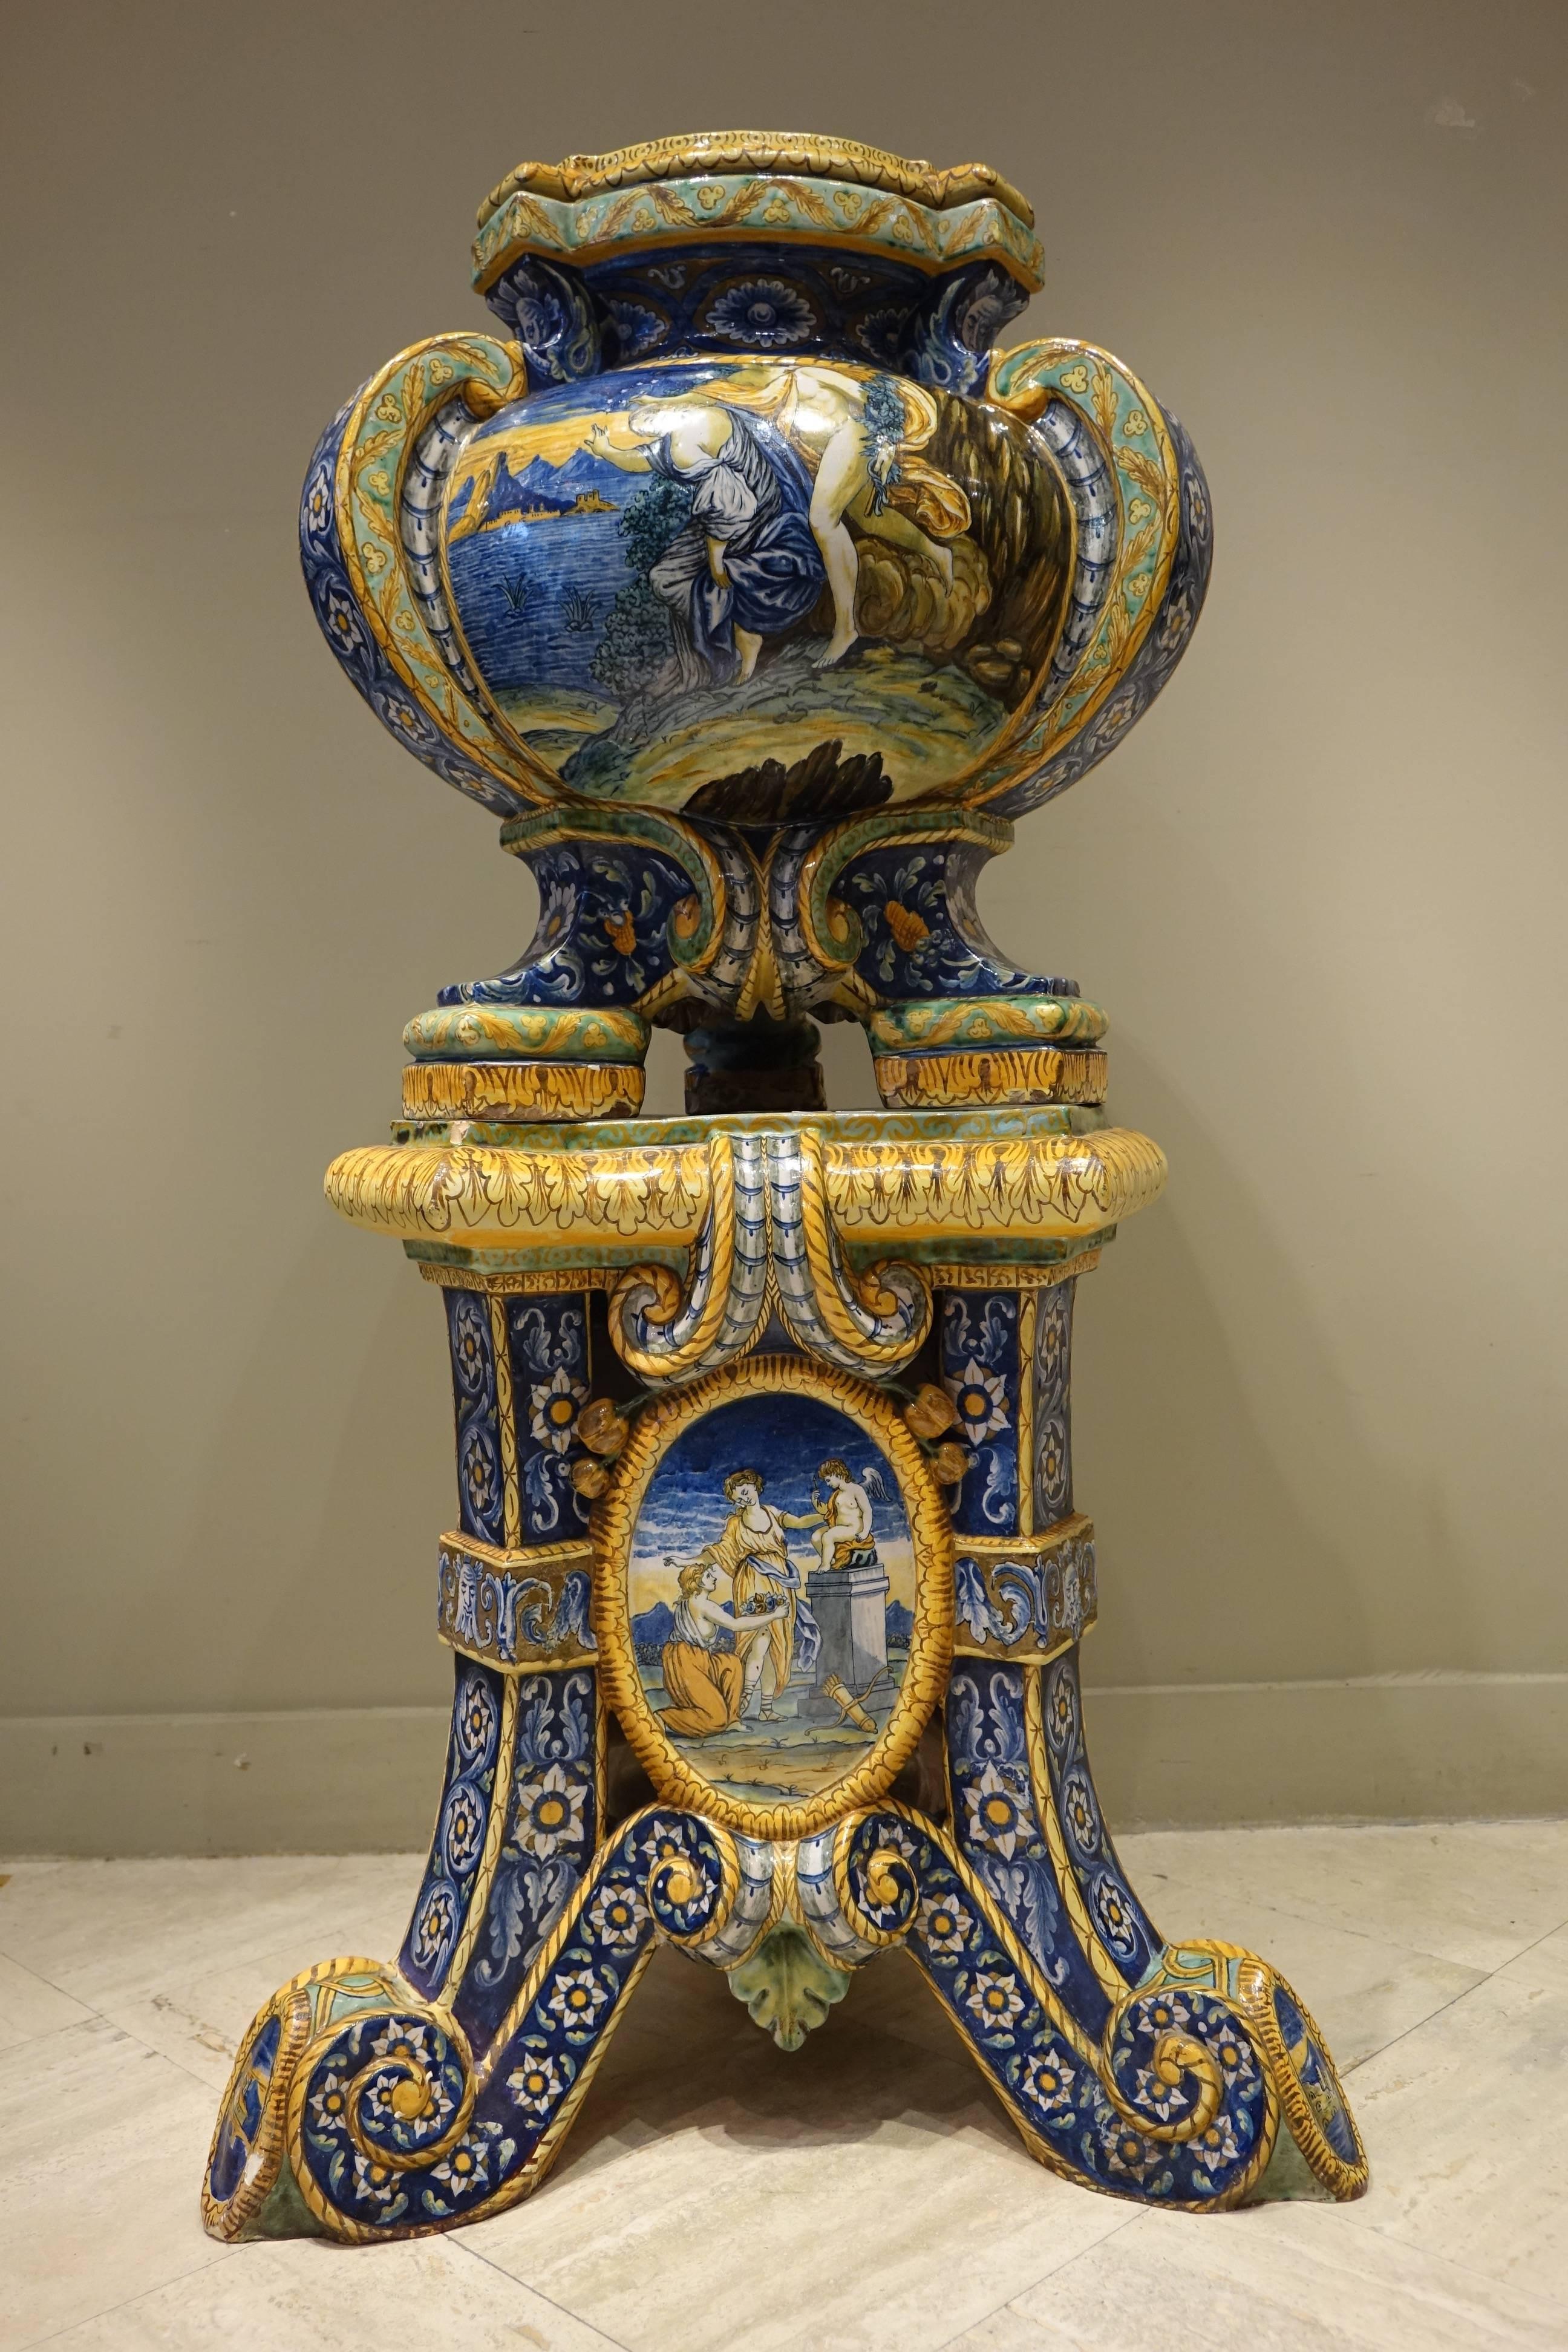 Renaissance Pair of Gardeners with Their Stand in Faience, Urbino Workshop, Italy